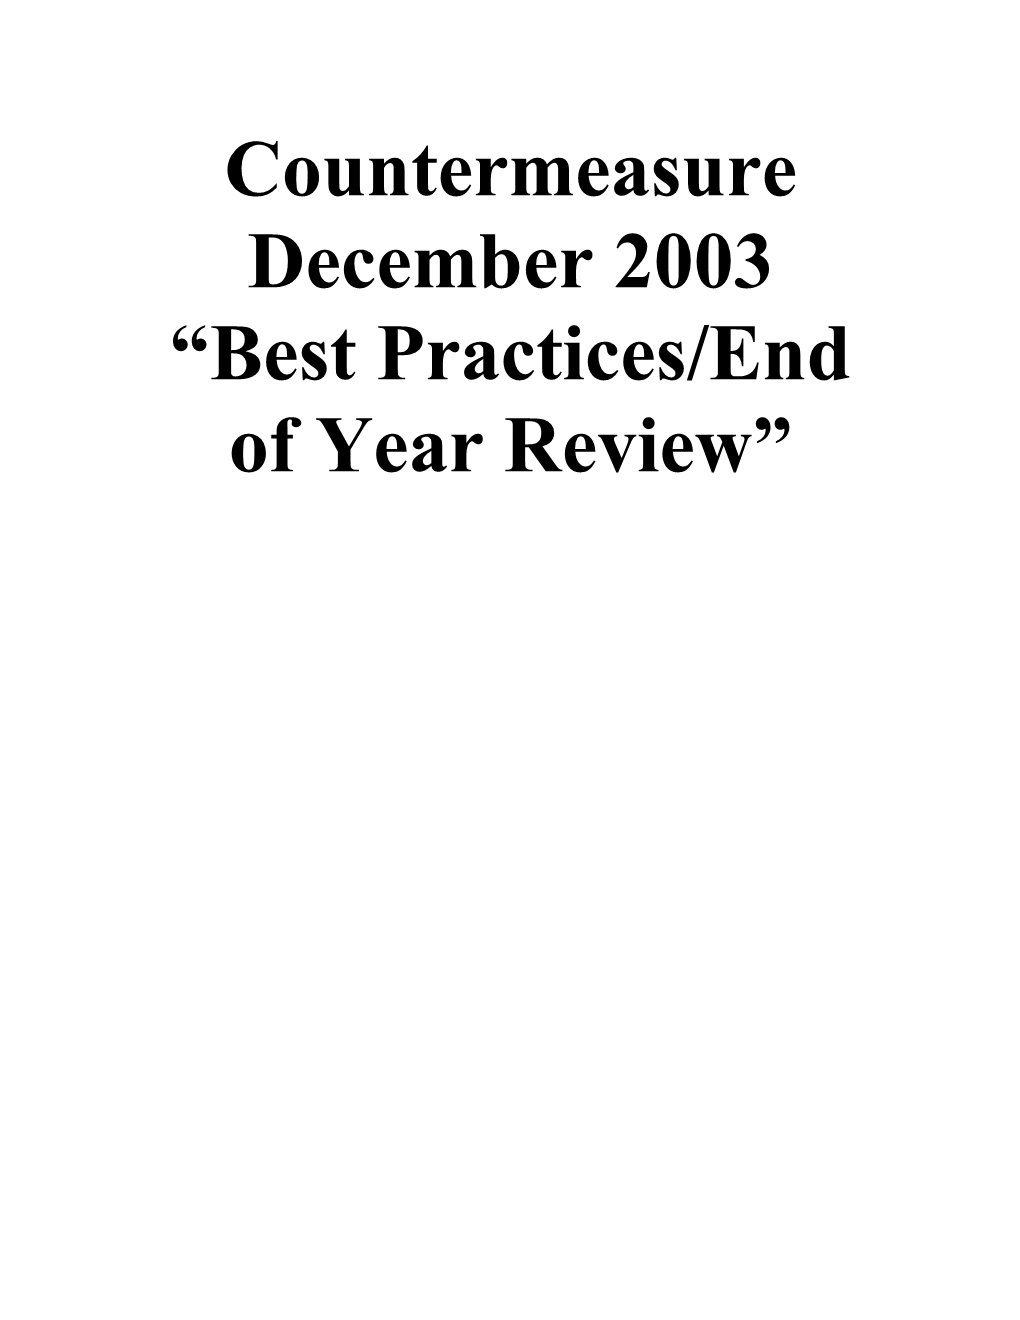 Best Practices/End of Year Review